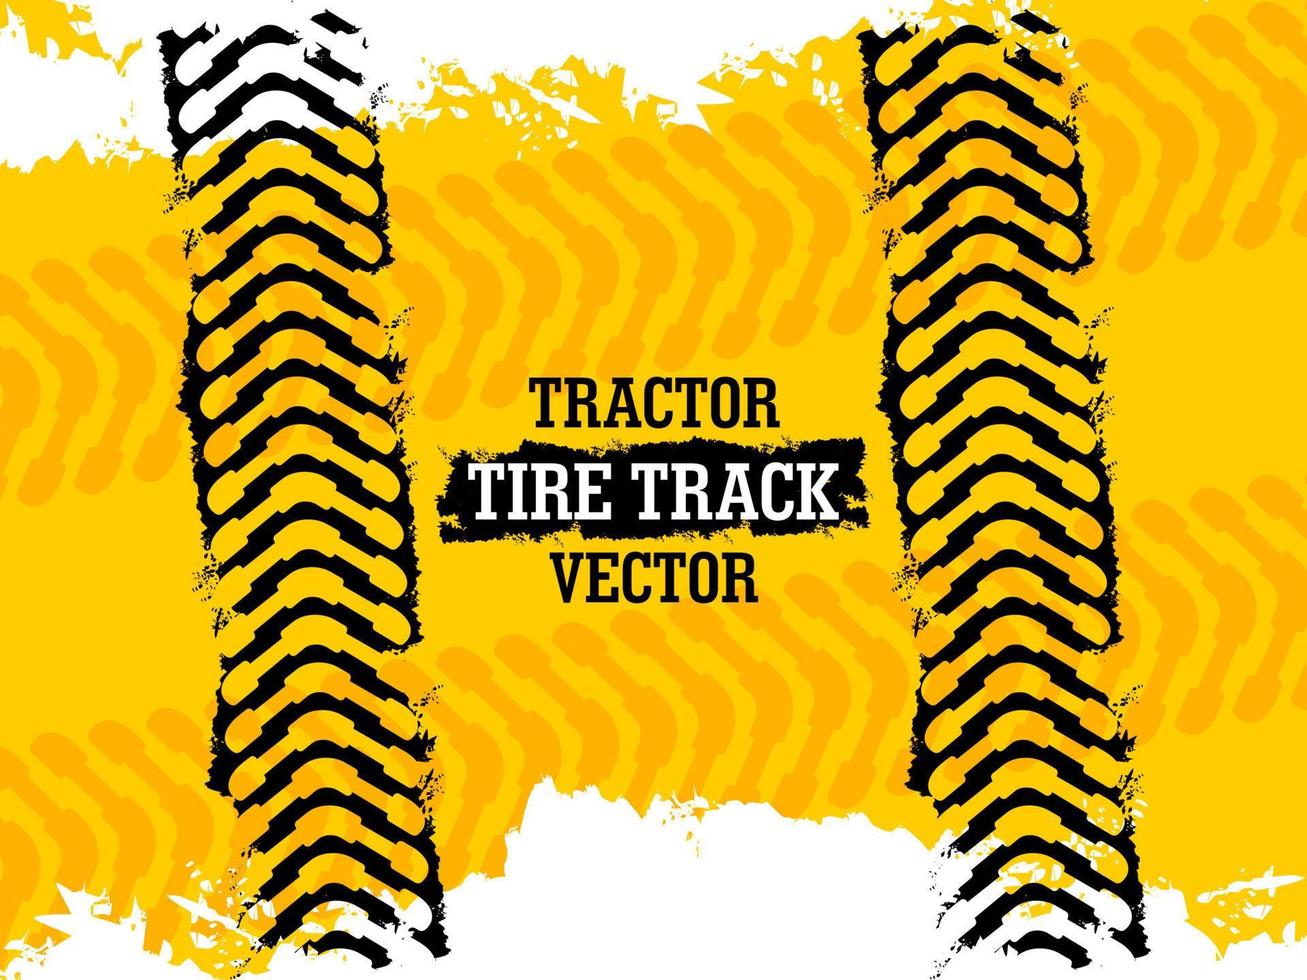 Tractor tire print mark background with grunge vector